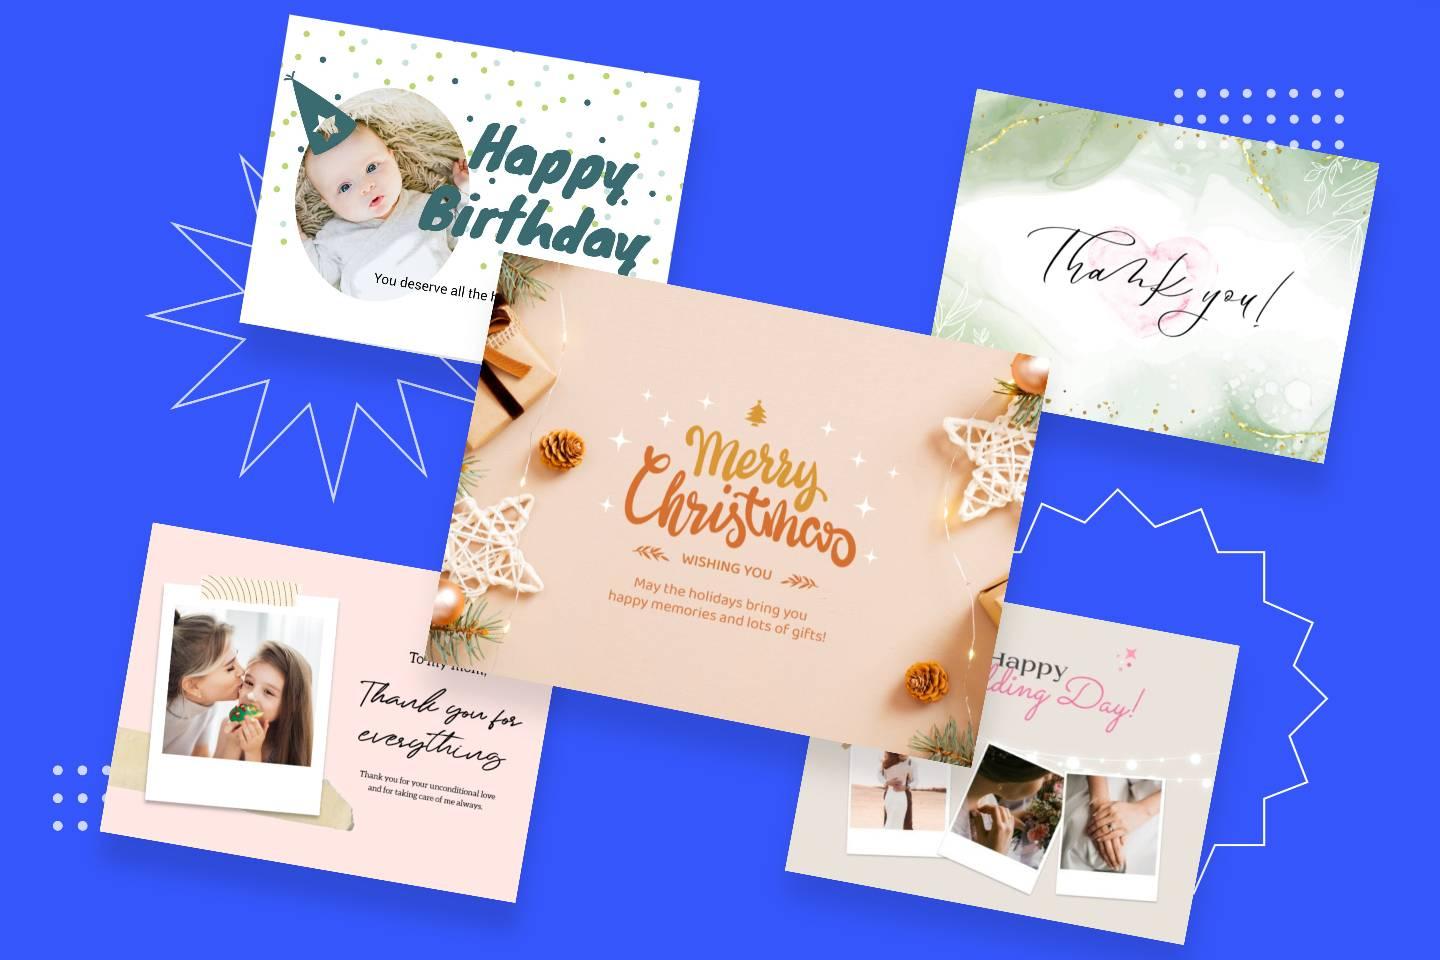 Make a card online easily with Fotor's free card maker